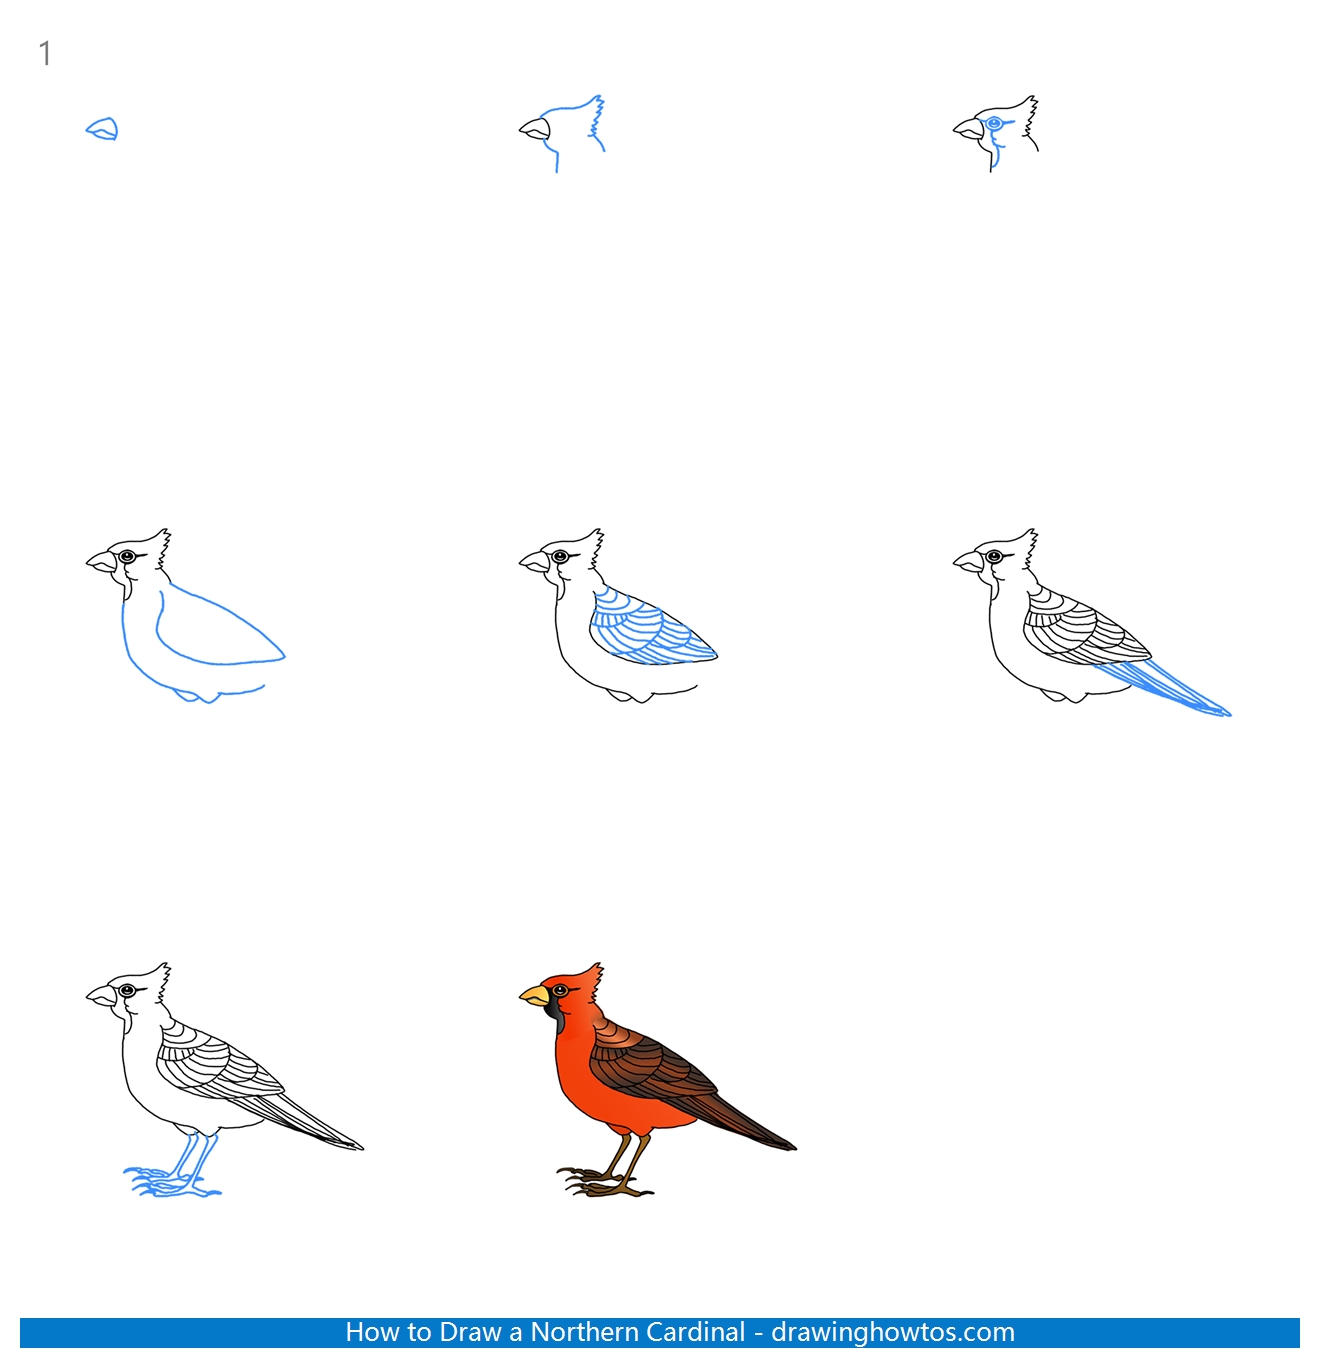 How to Draw a Northern Cardinal Step by Step